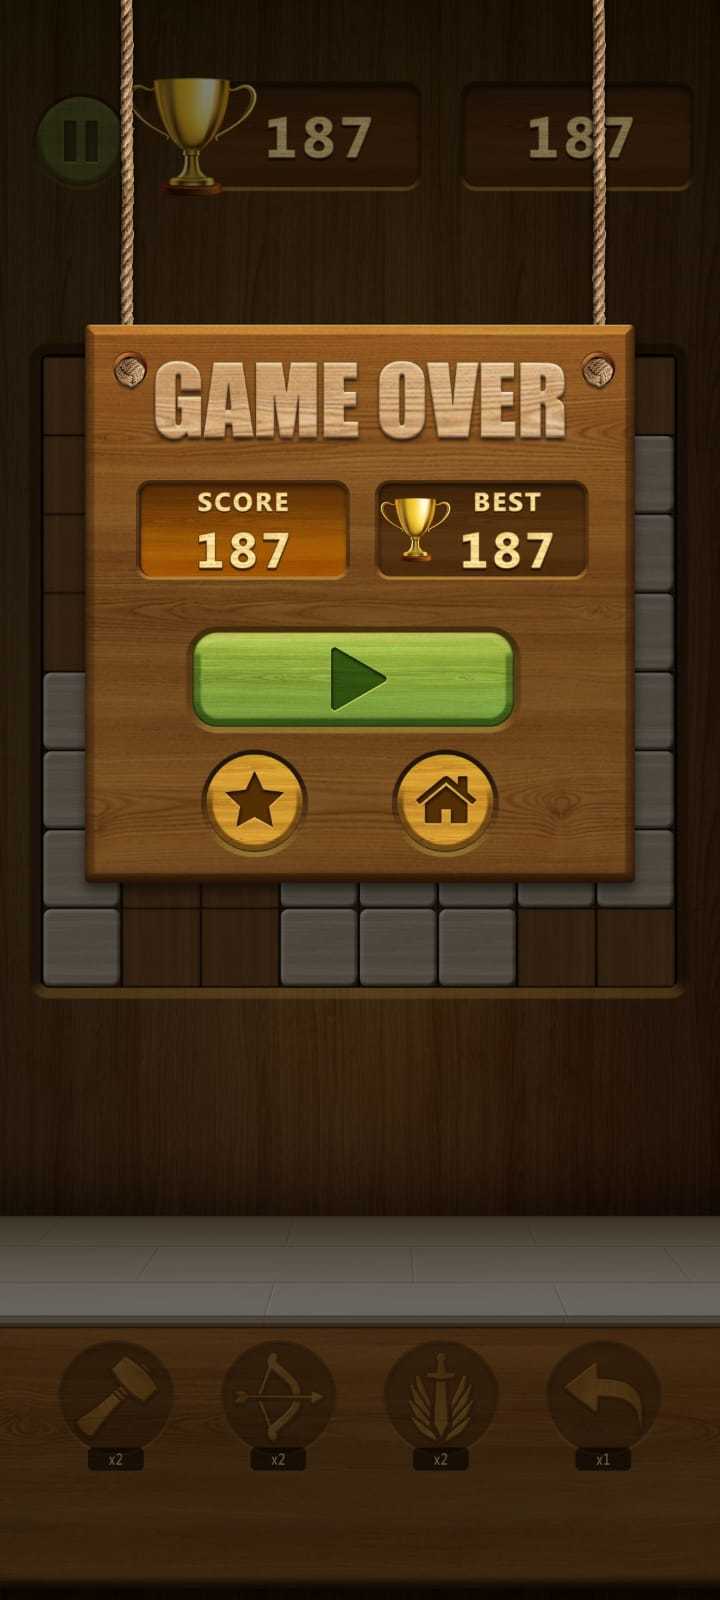 Woodoku - Wood Block Puzzle Game::Appstore for Android